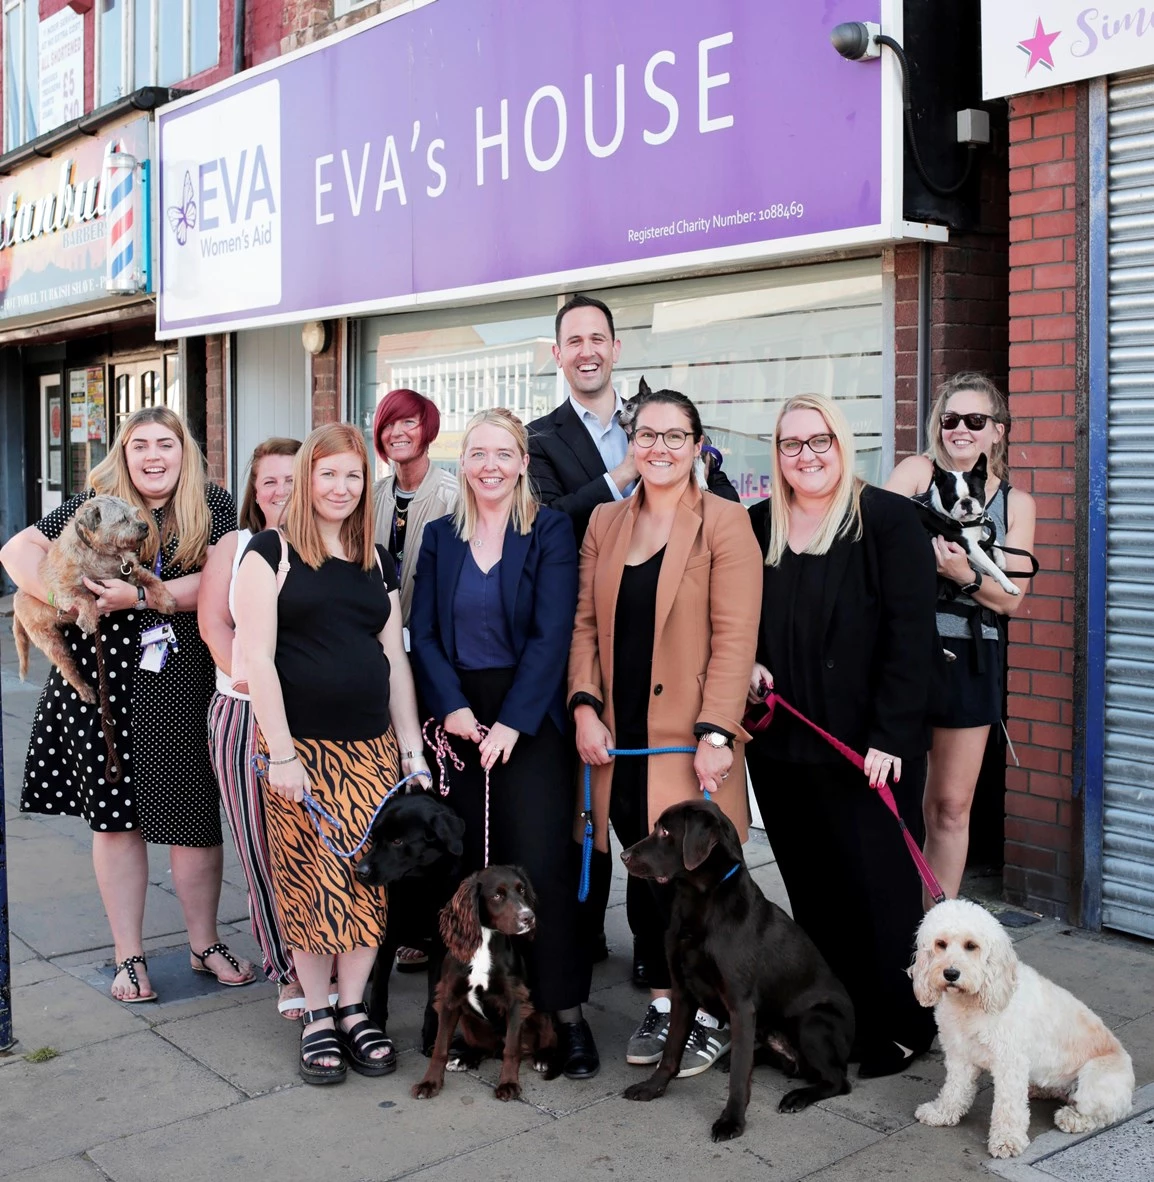 The teams from Cygnet Law and EVA Women's Aid with dogs